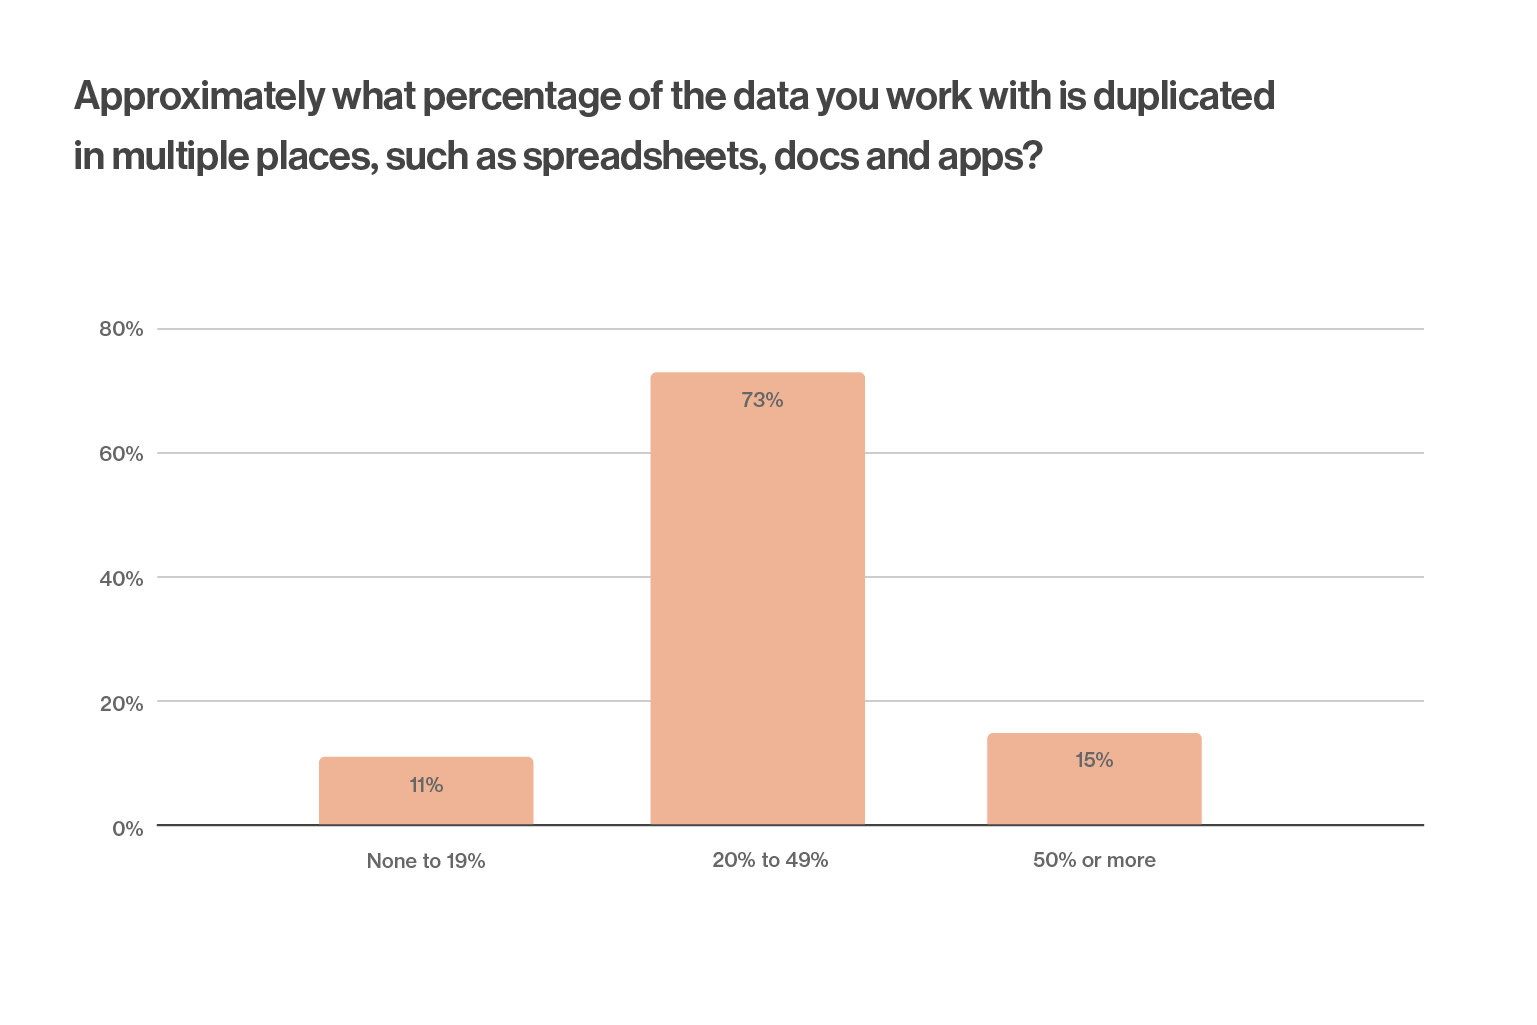 Survey question that reads: Approximately what percentage of the data you work with is duplicated in multiple places, such as spreadsheets, docs, and apps? Answer breakdown: 11% - None to 19%; 73% - 20 to 49%; 15% - 50% or more